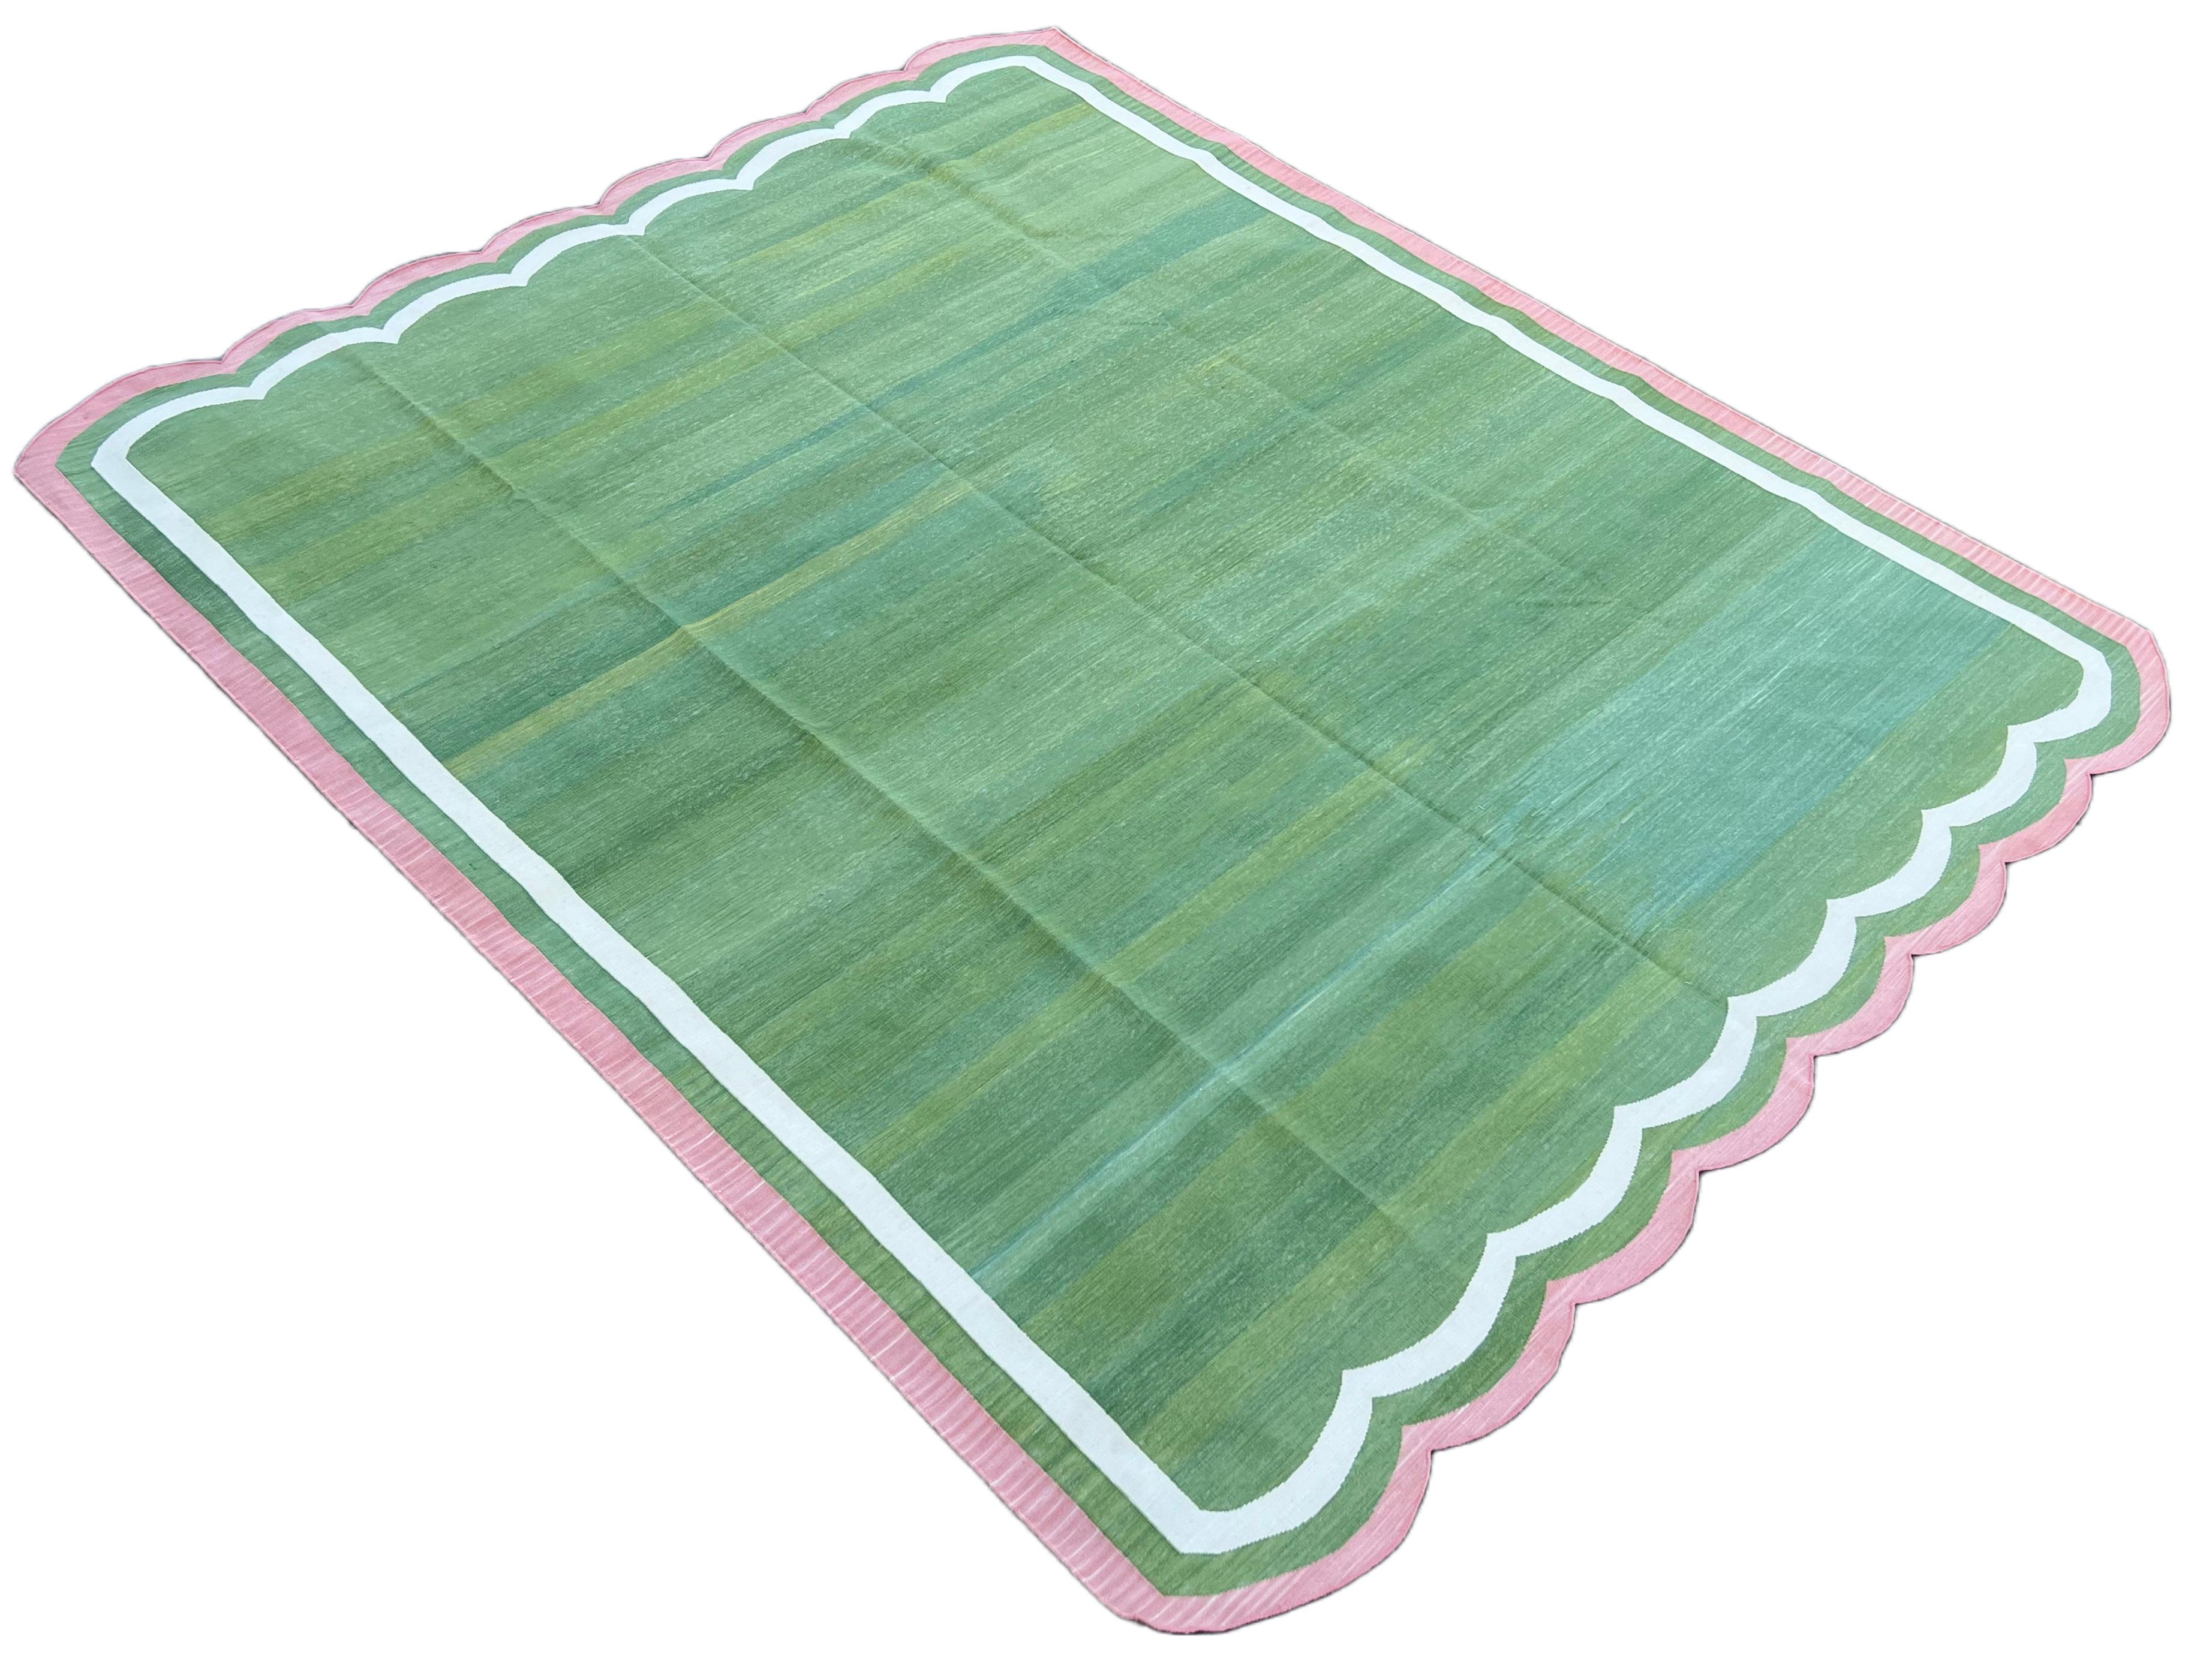 Cotton Vegetable Dyed Moss Green and Pink 2 Sided Indian Scalloped Rug - 8'x10'
These special flat-weave dhurries are hand-woven with 15 ply 100% cotton yarn. Due to the special manufacturing techniques used to create our rugs, the size and color of